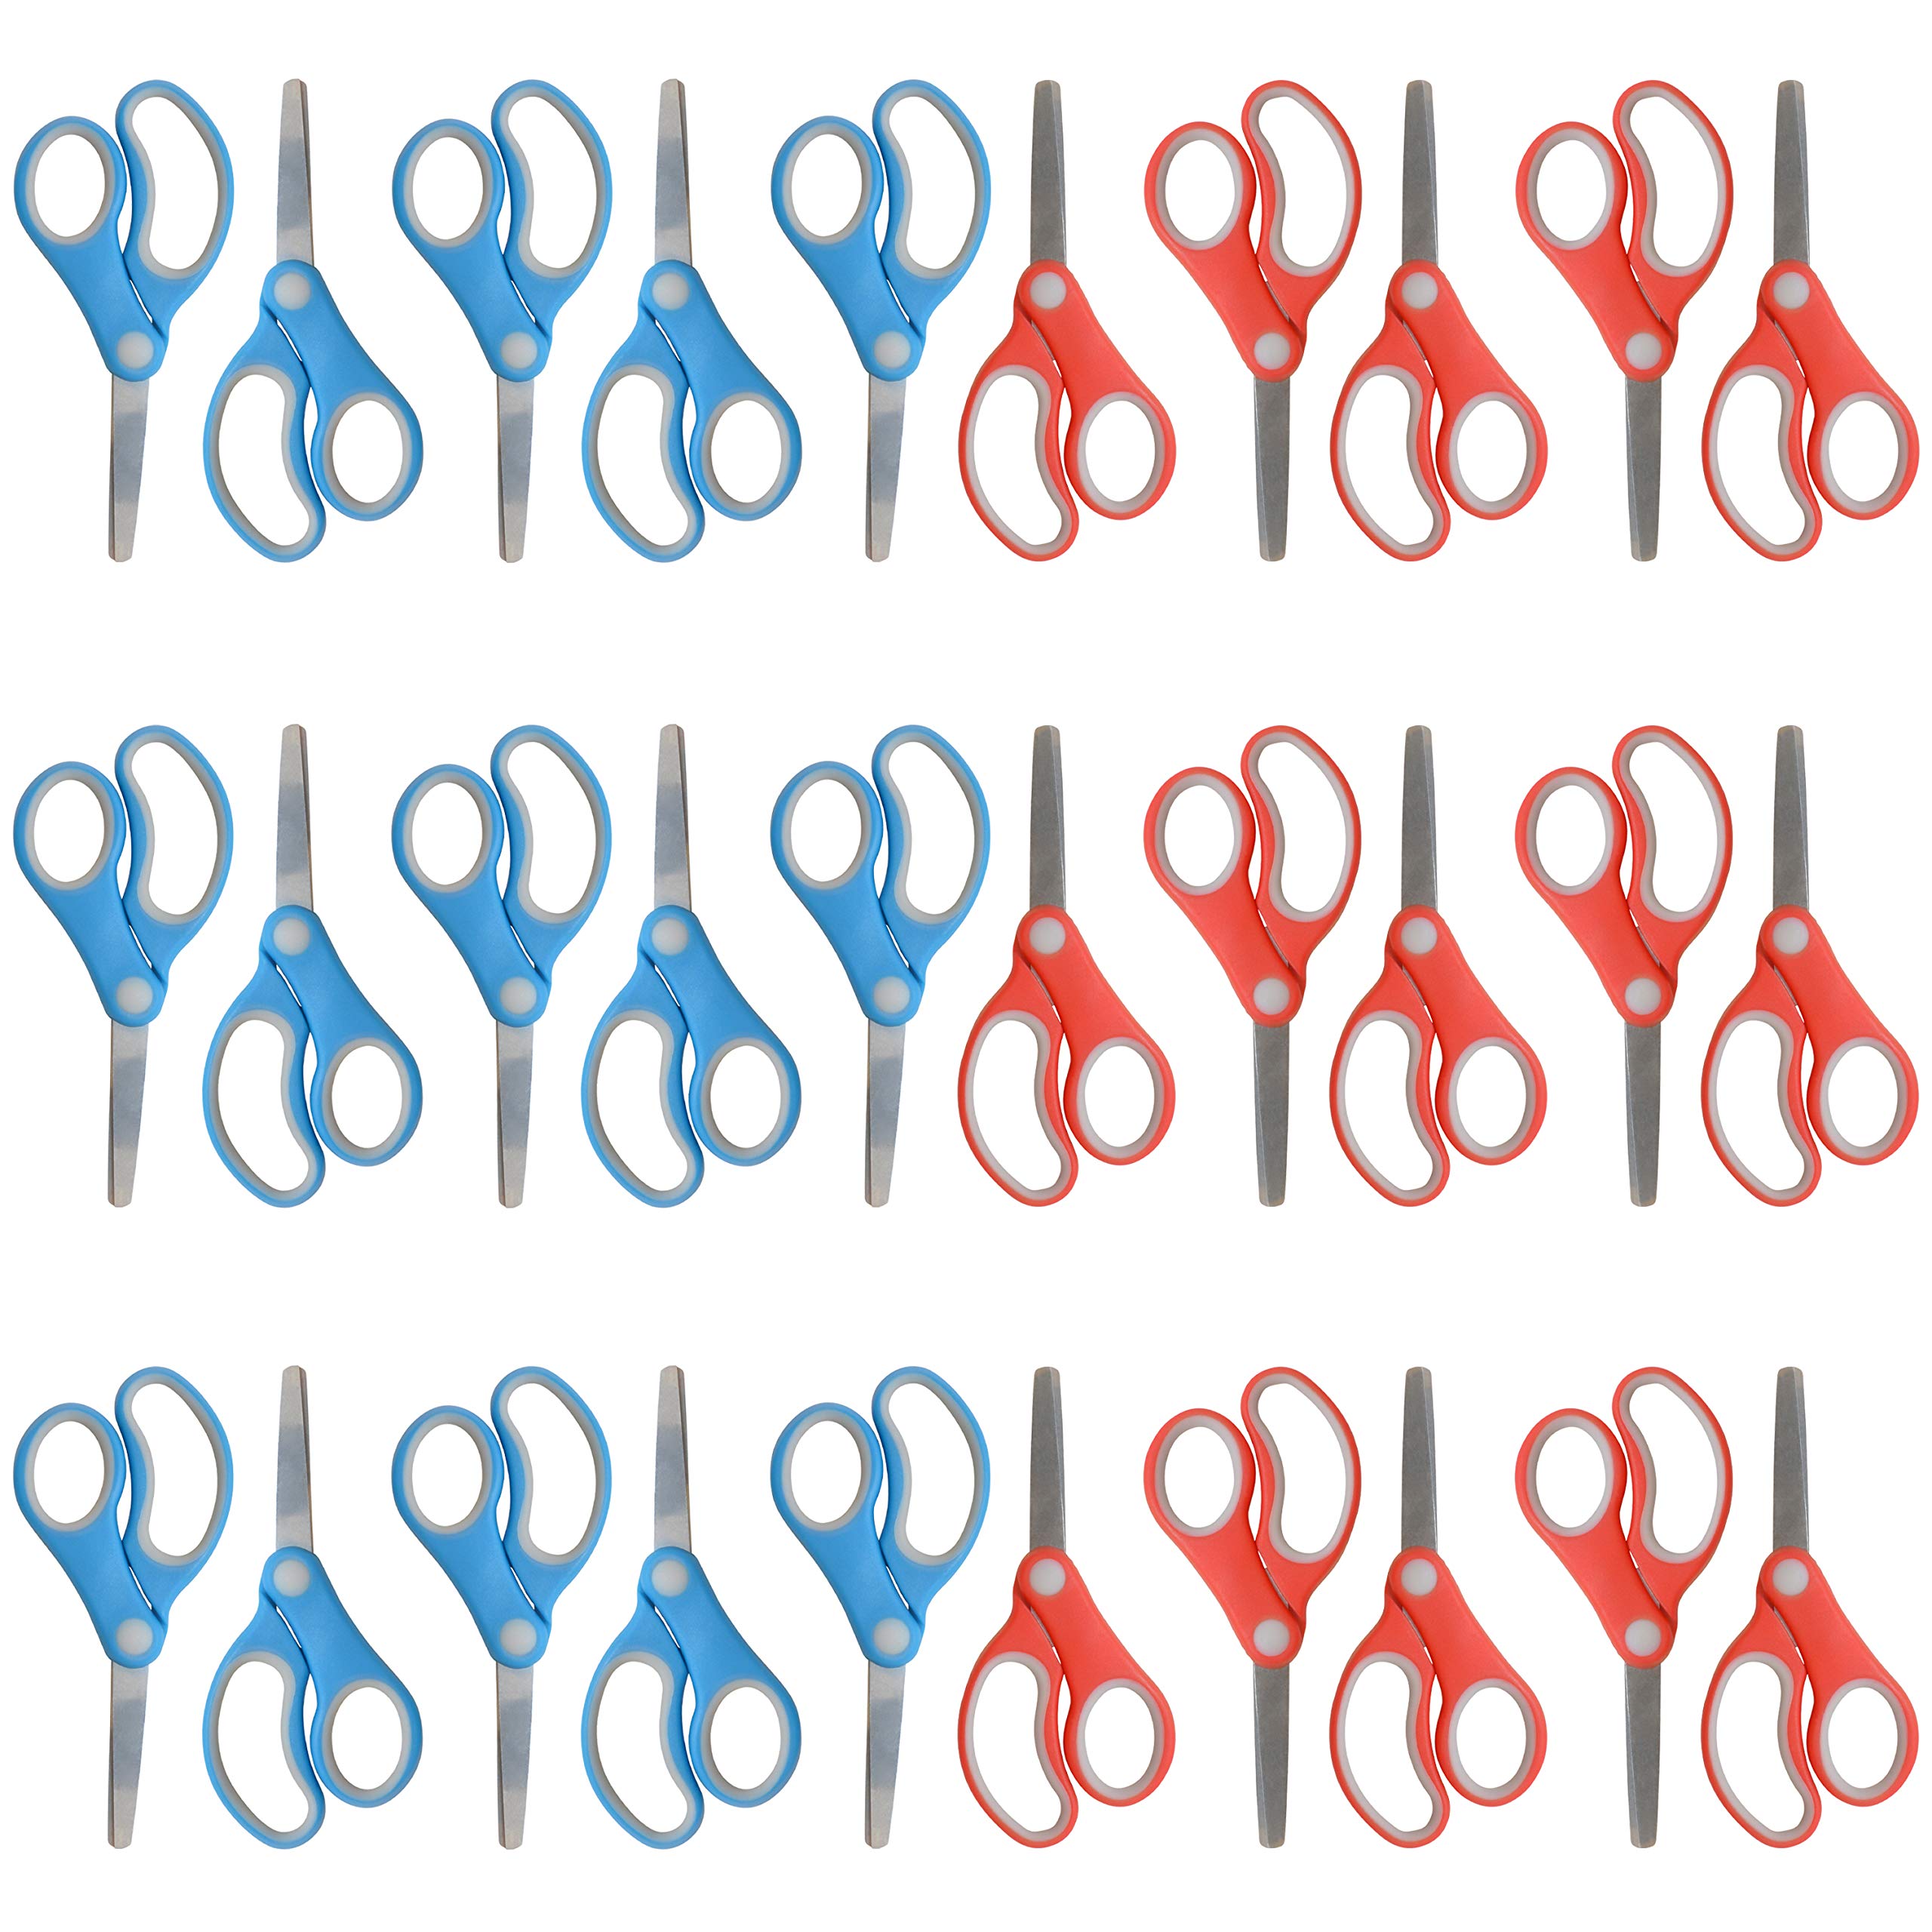 30-Pack 5 Westcott Right- and Left-Handed Blunt Tip Kids' Scissors $13.25  ($0.44 each) + Free Shipping w/ Prime or on $25+